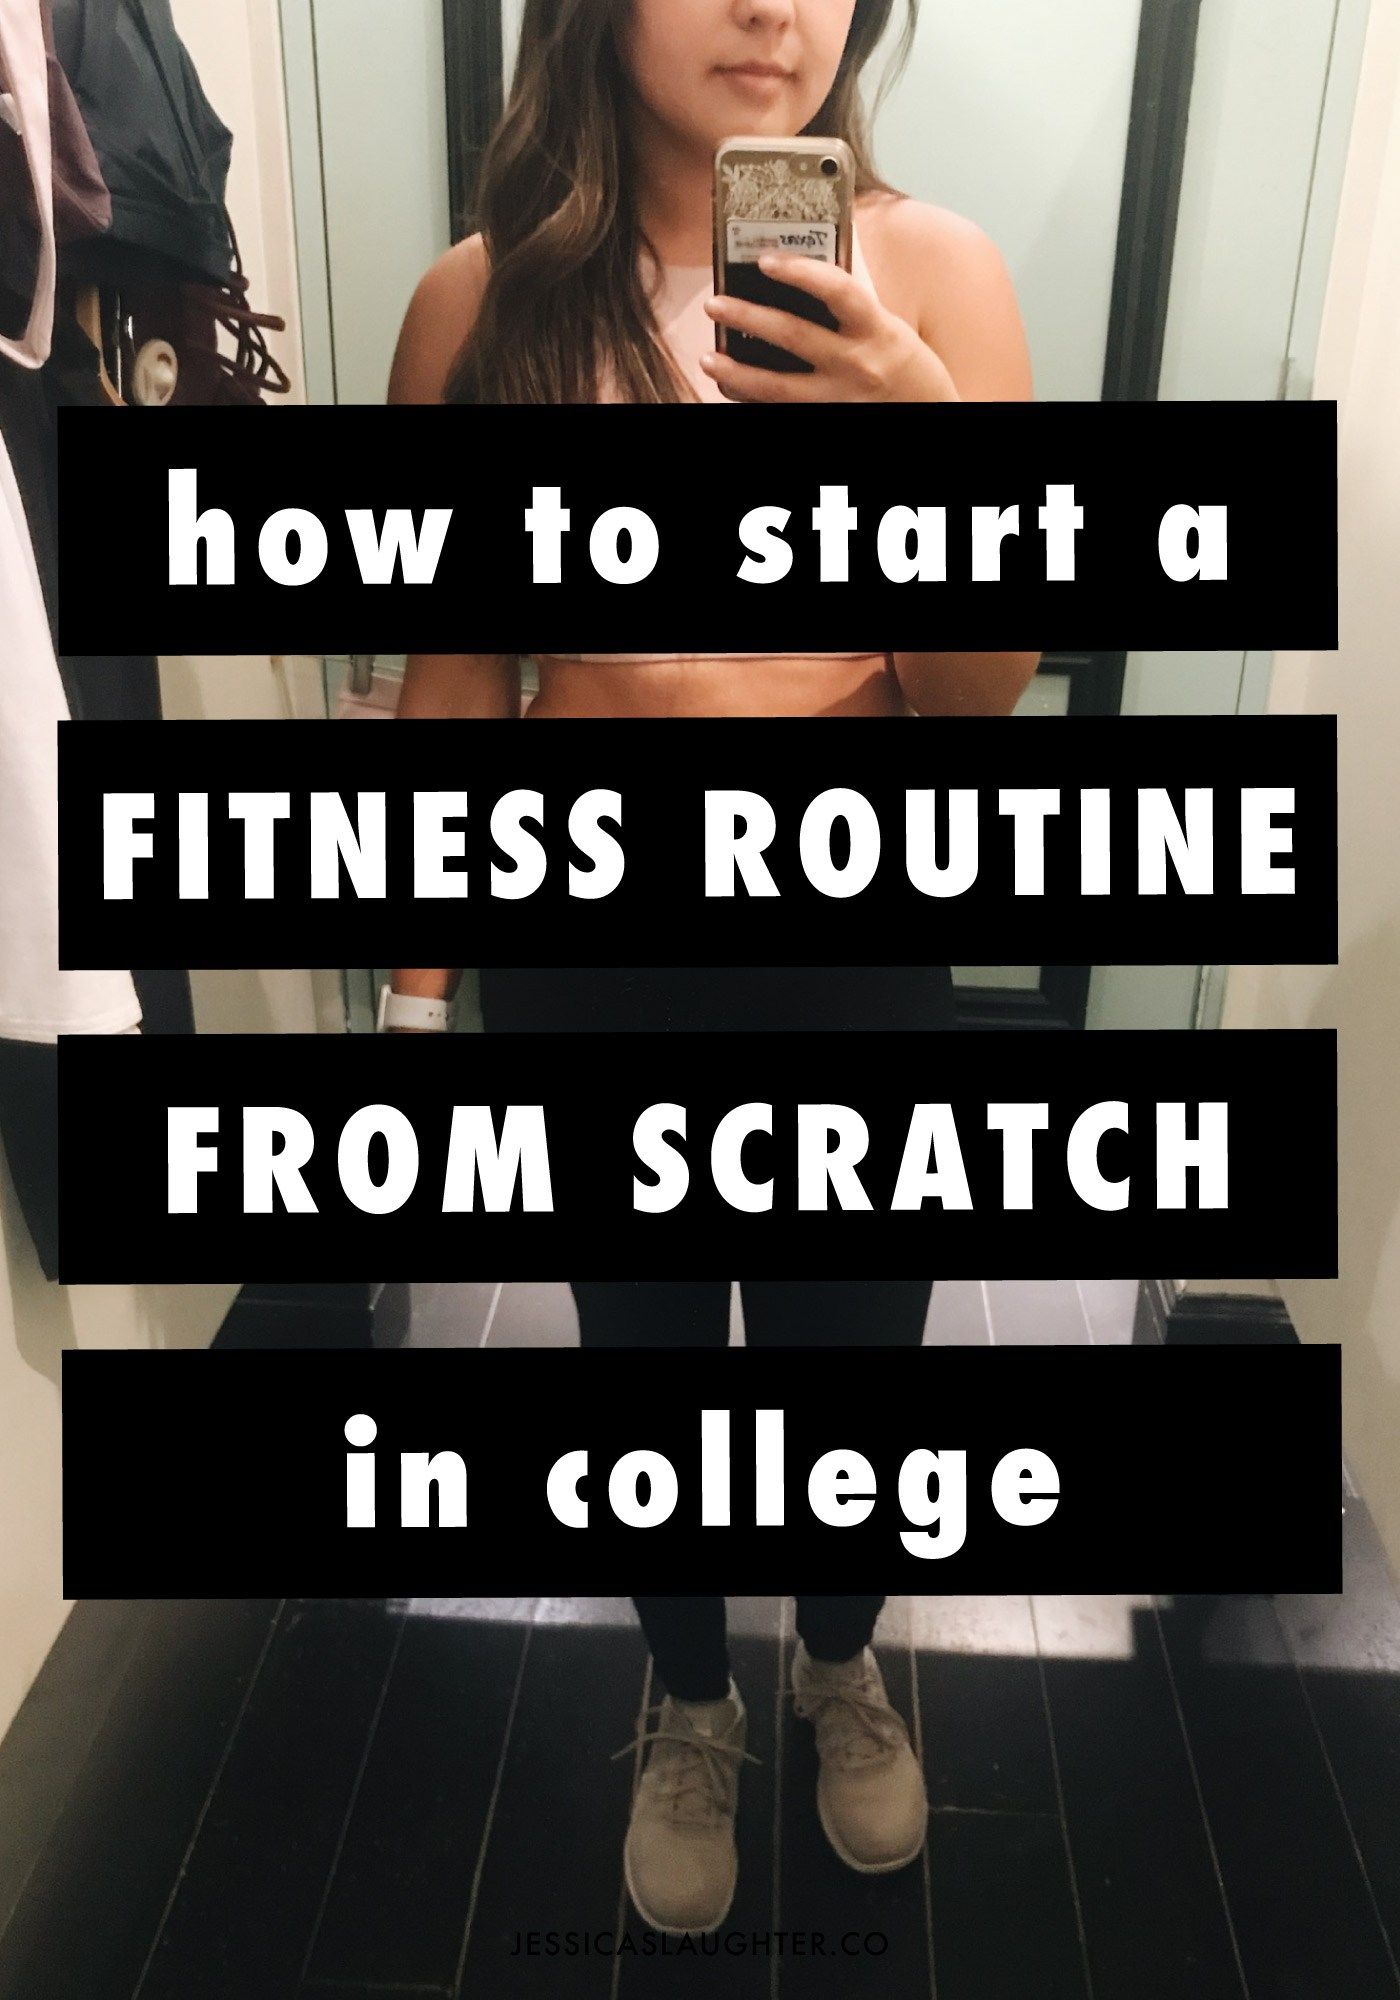 Starting A Fitness Routine From Scratch In College - Jessica Slaughter